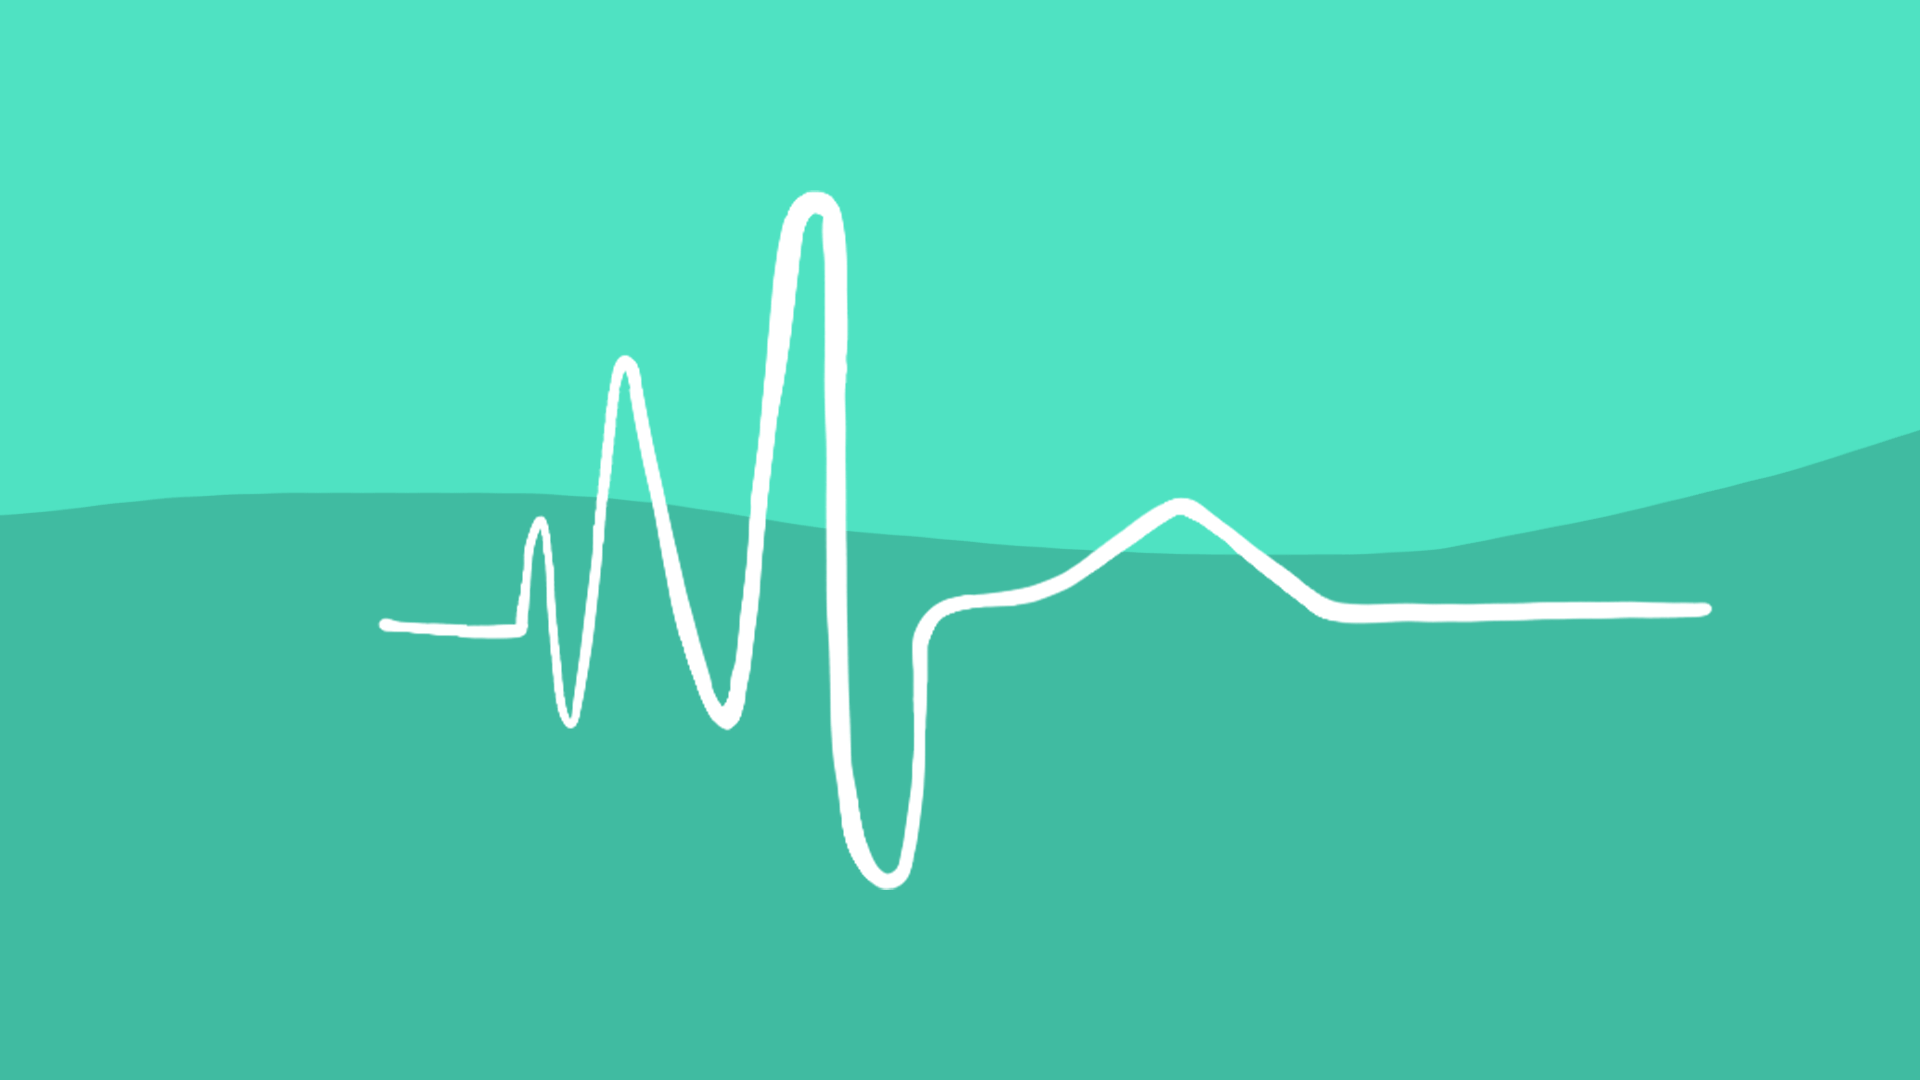 What Causes Resting Heart Rate To Go Up